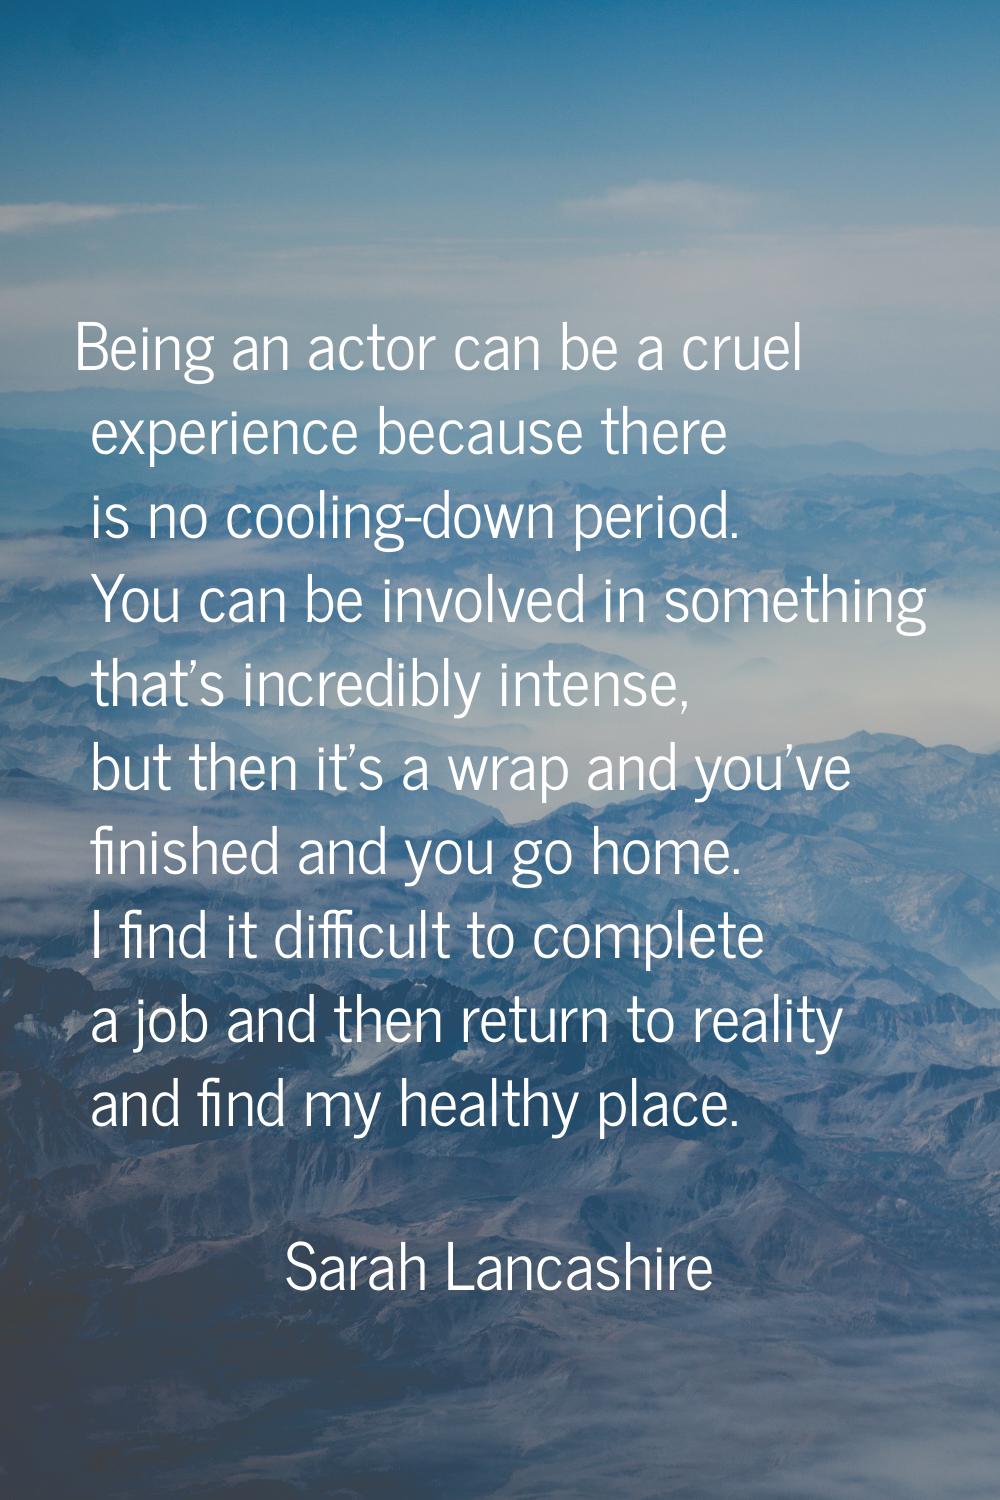 Being an actor can be a cruel experience because there is no cooling-down period. You can be involv